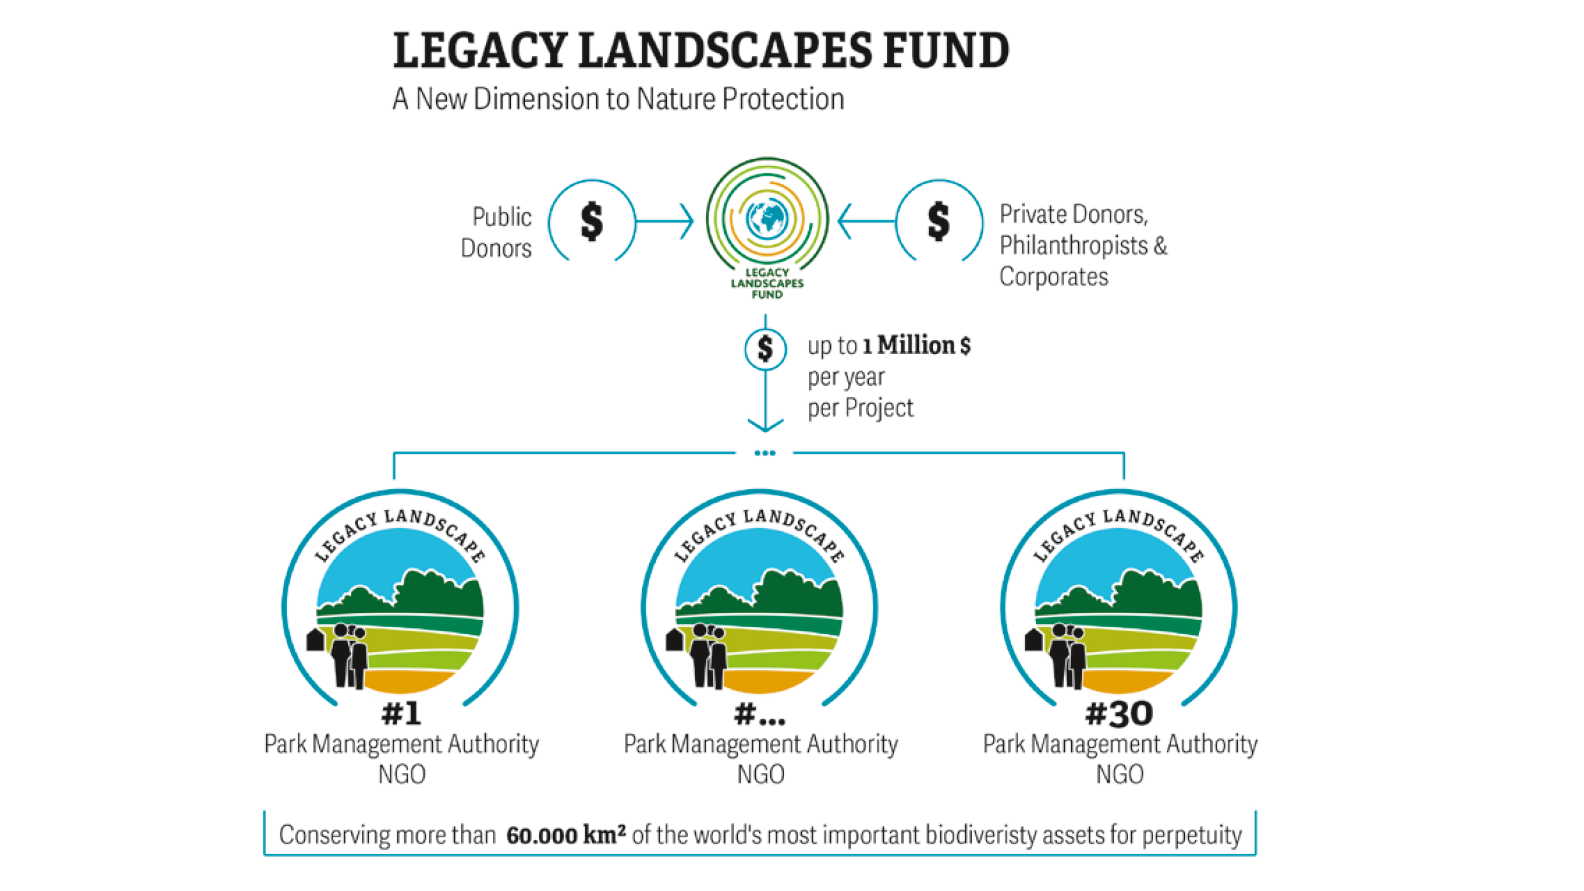 Financing of the Legacy Landscapes Fund